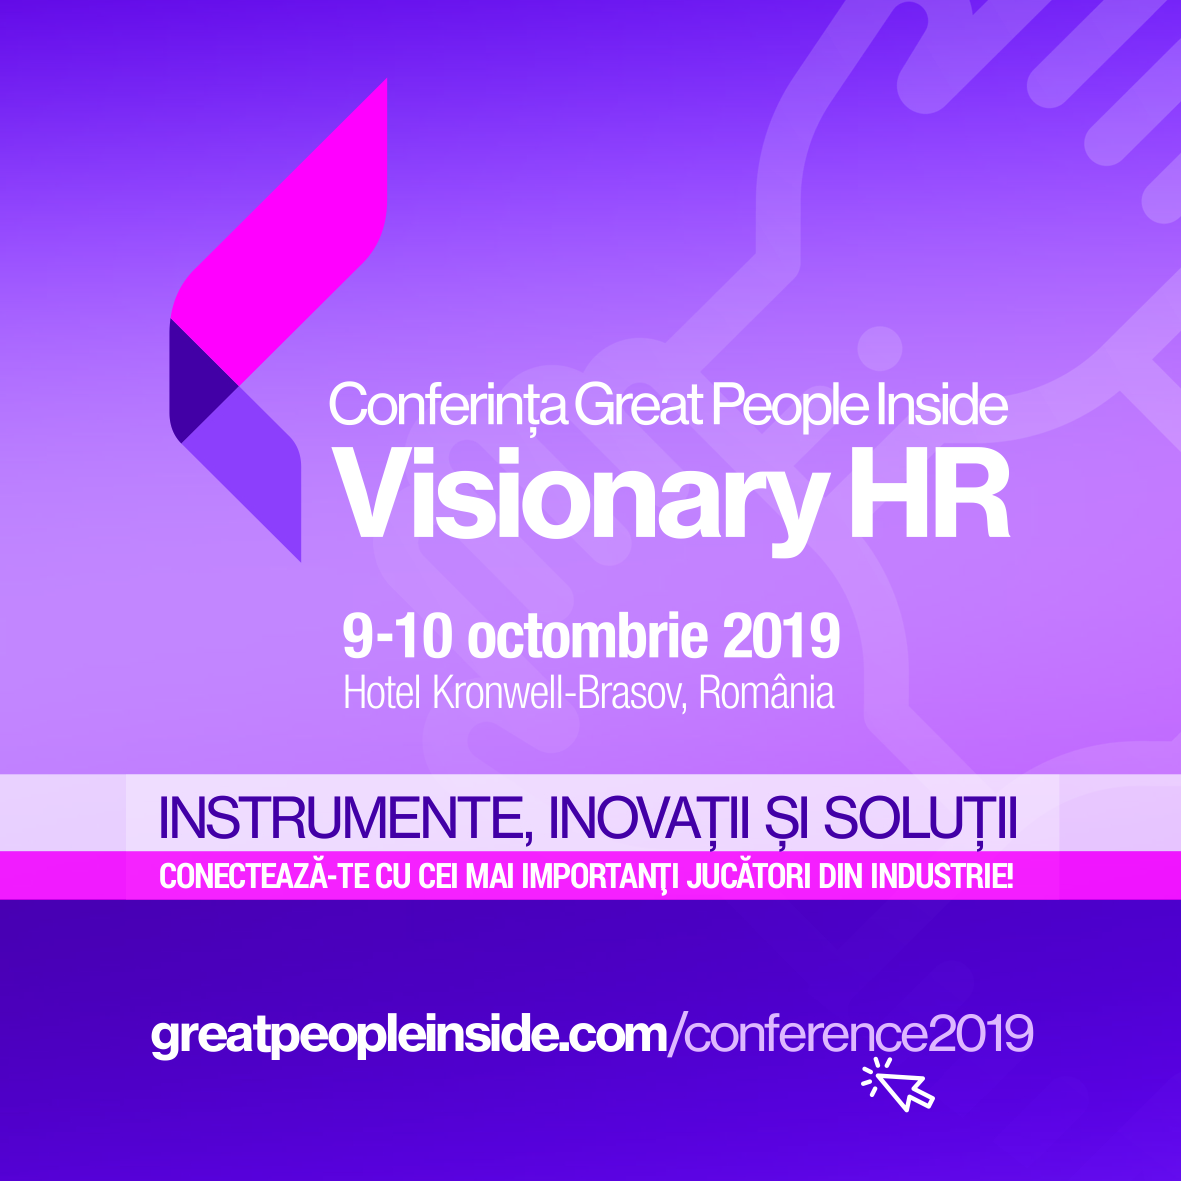 Conferința Great People Inside Visionary HR